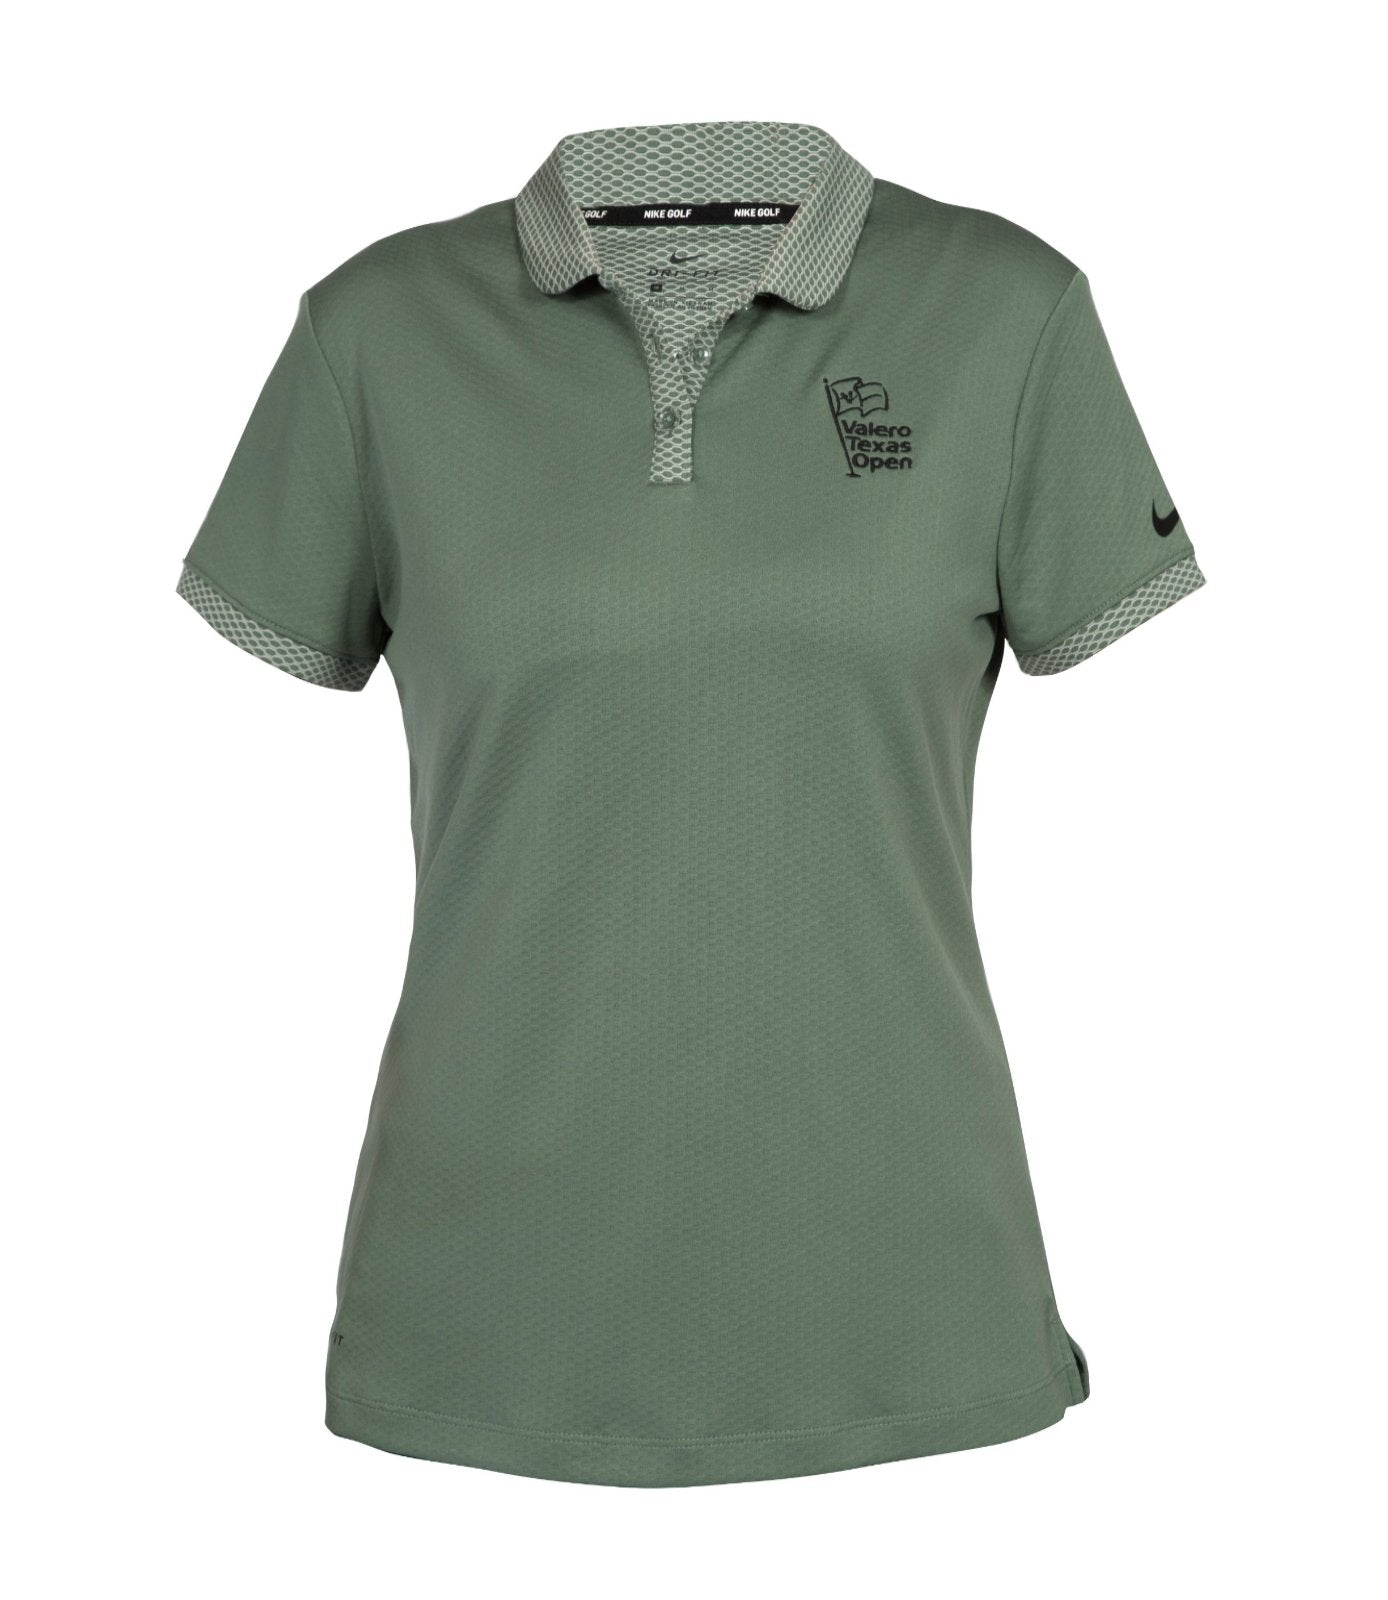 Women's Nike Dry Fit Polo